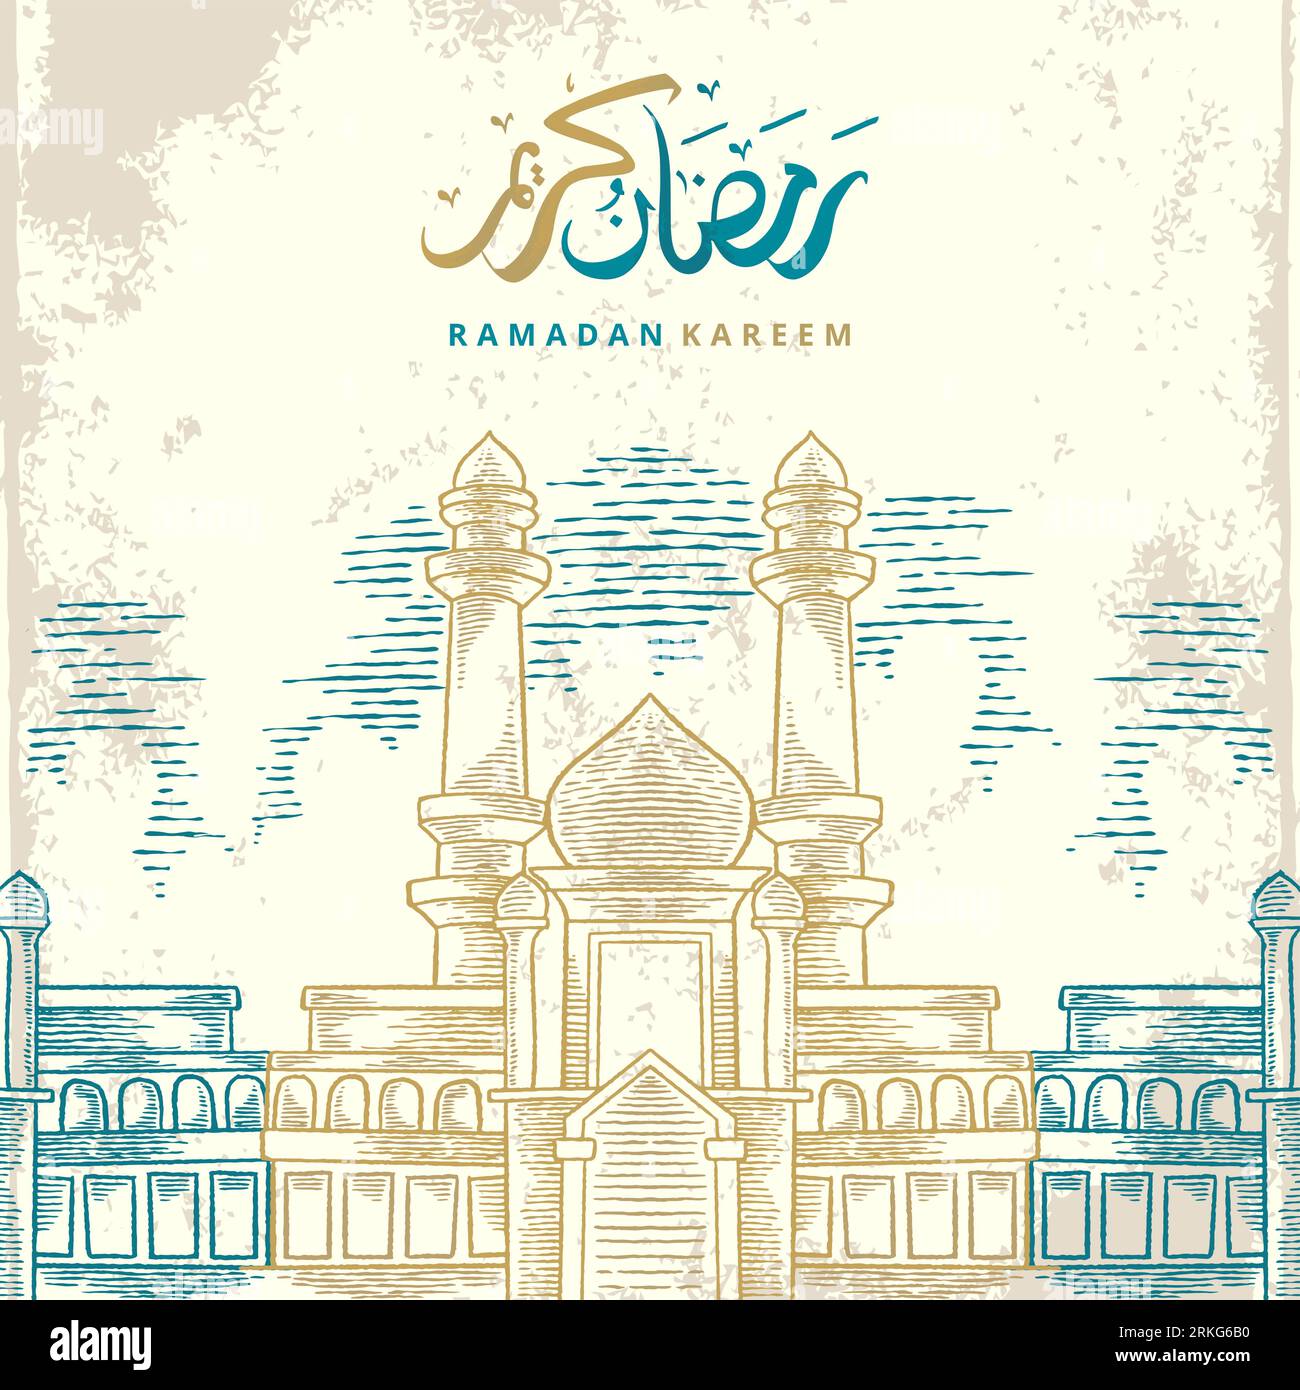 Ramadan Kareem greeting card with golden and blue big mosque sketch and Golden Arabic calligraphy means 'Holly Ramadan'. Hand drawn sketch elegant des Stock Vector